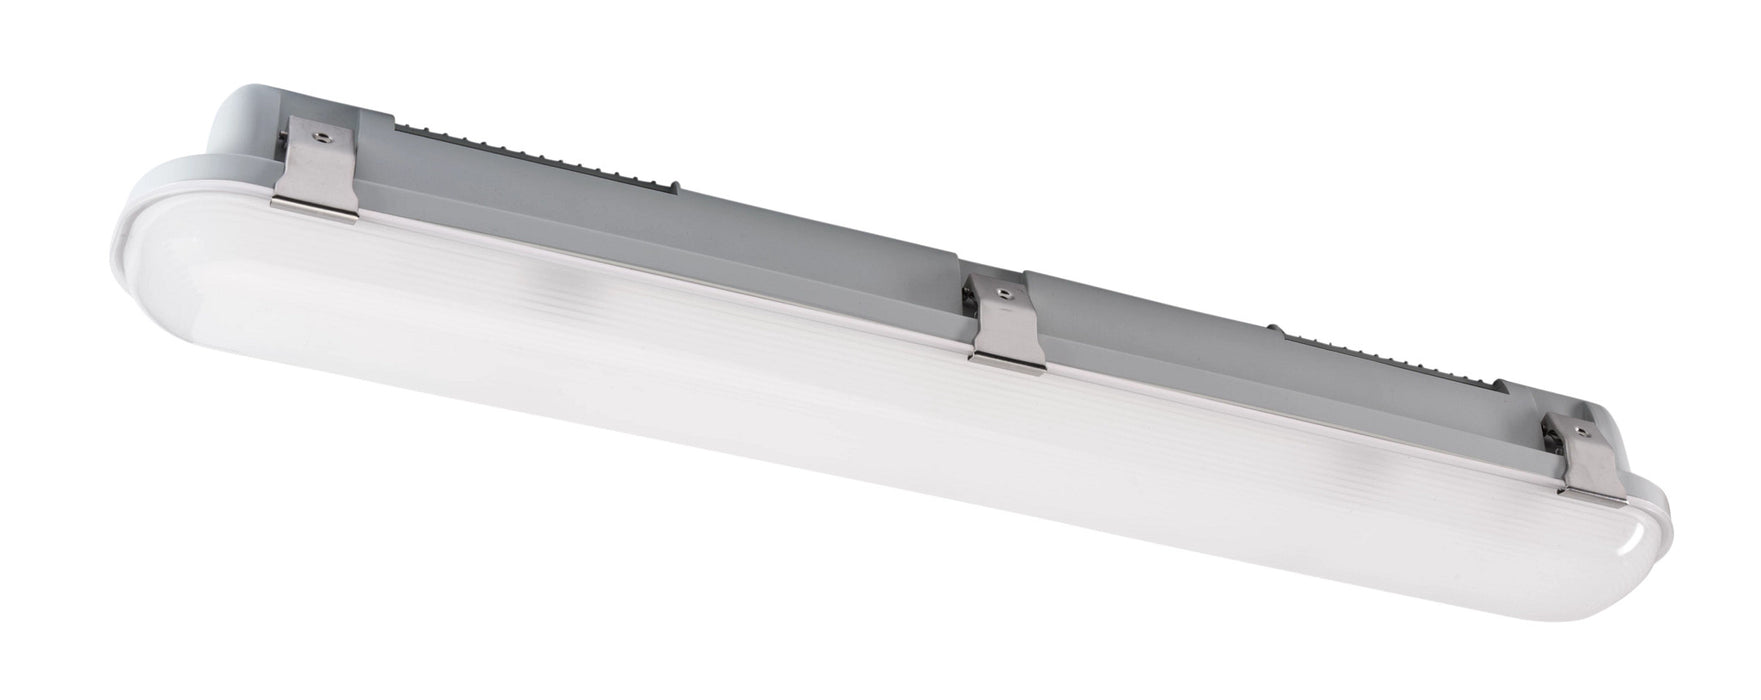 Keystone 2 Foot Vapor Tight Fixture Featuring Wattage/CCT Selectable 25W/20W/15W 3500K/4000K/5000K 120-277V Frosted Lens 0-10V Dimming (KT-VTLED25PS-2A-8CSA-VDIM)